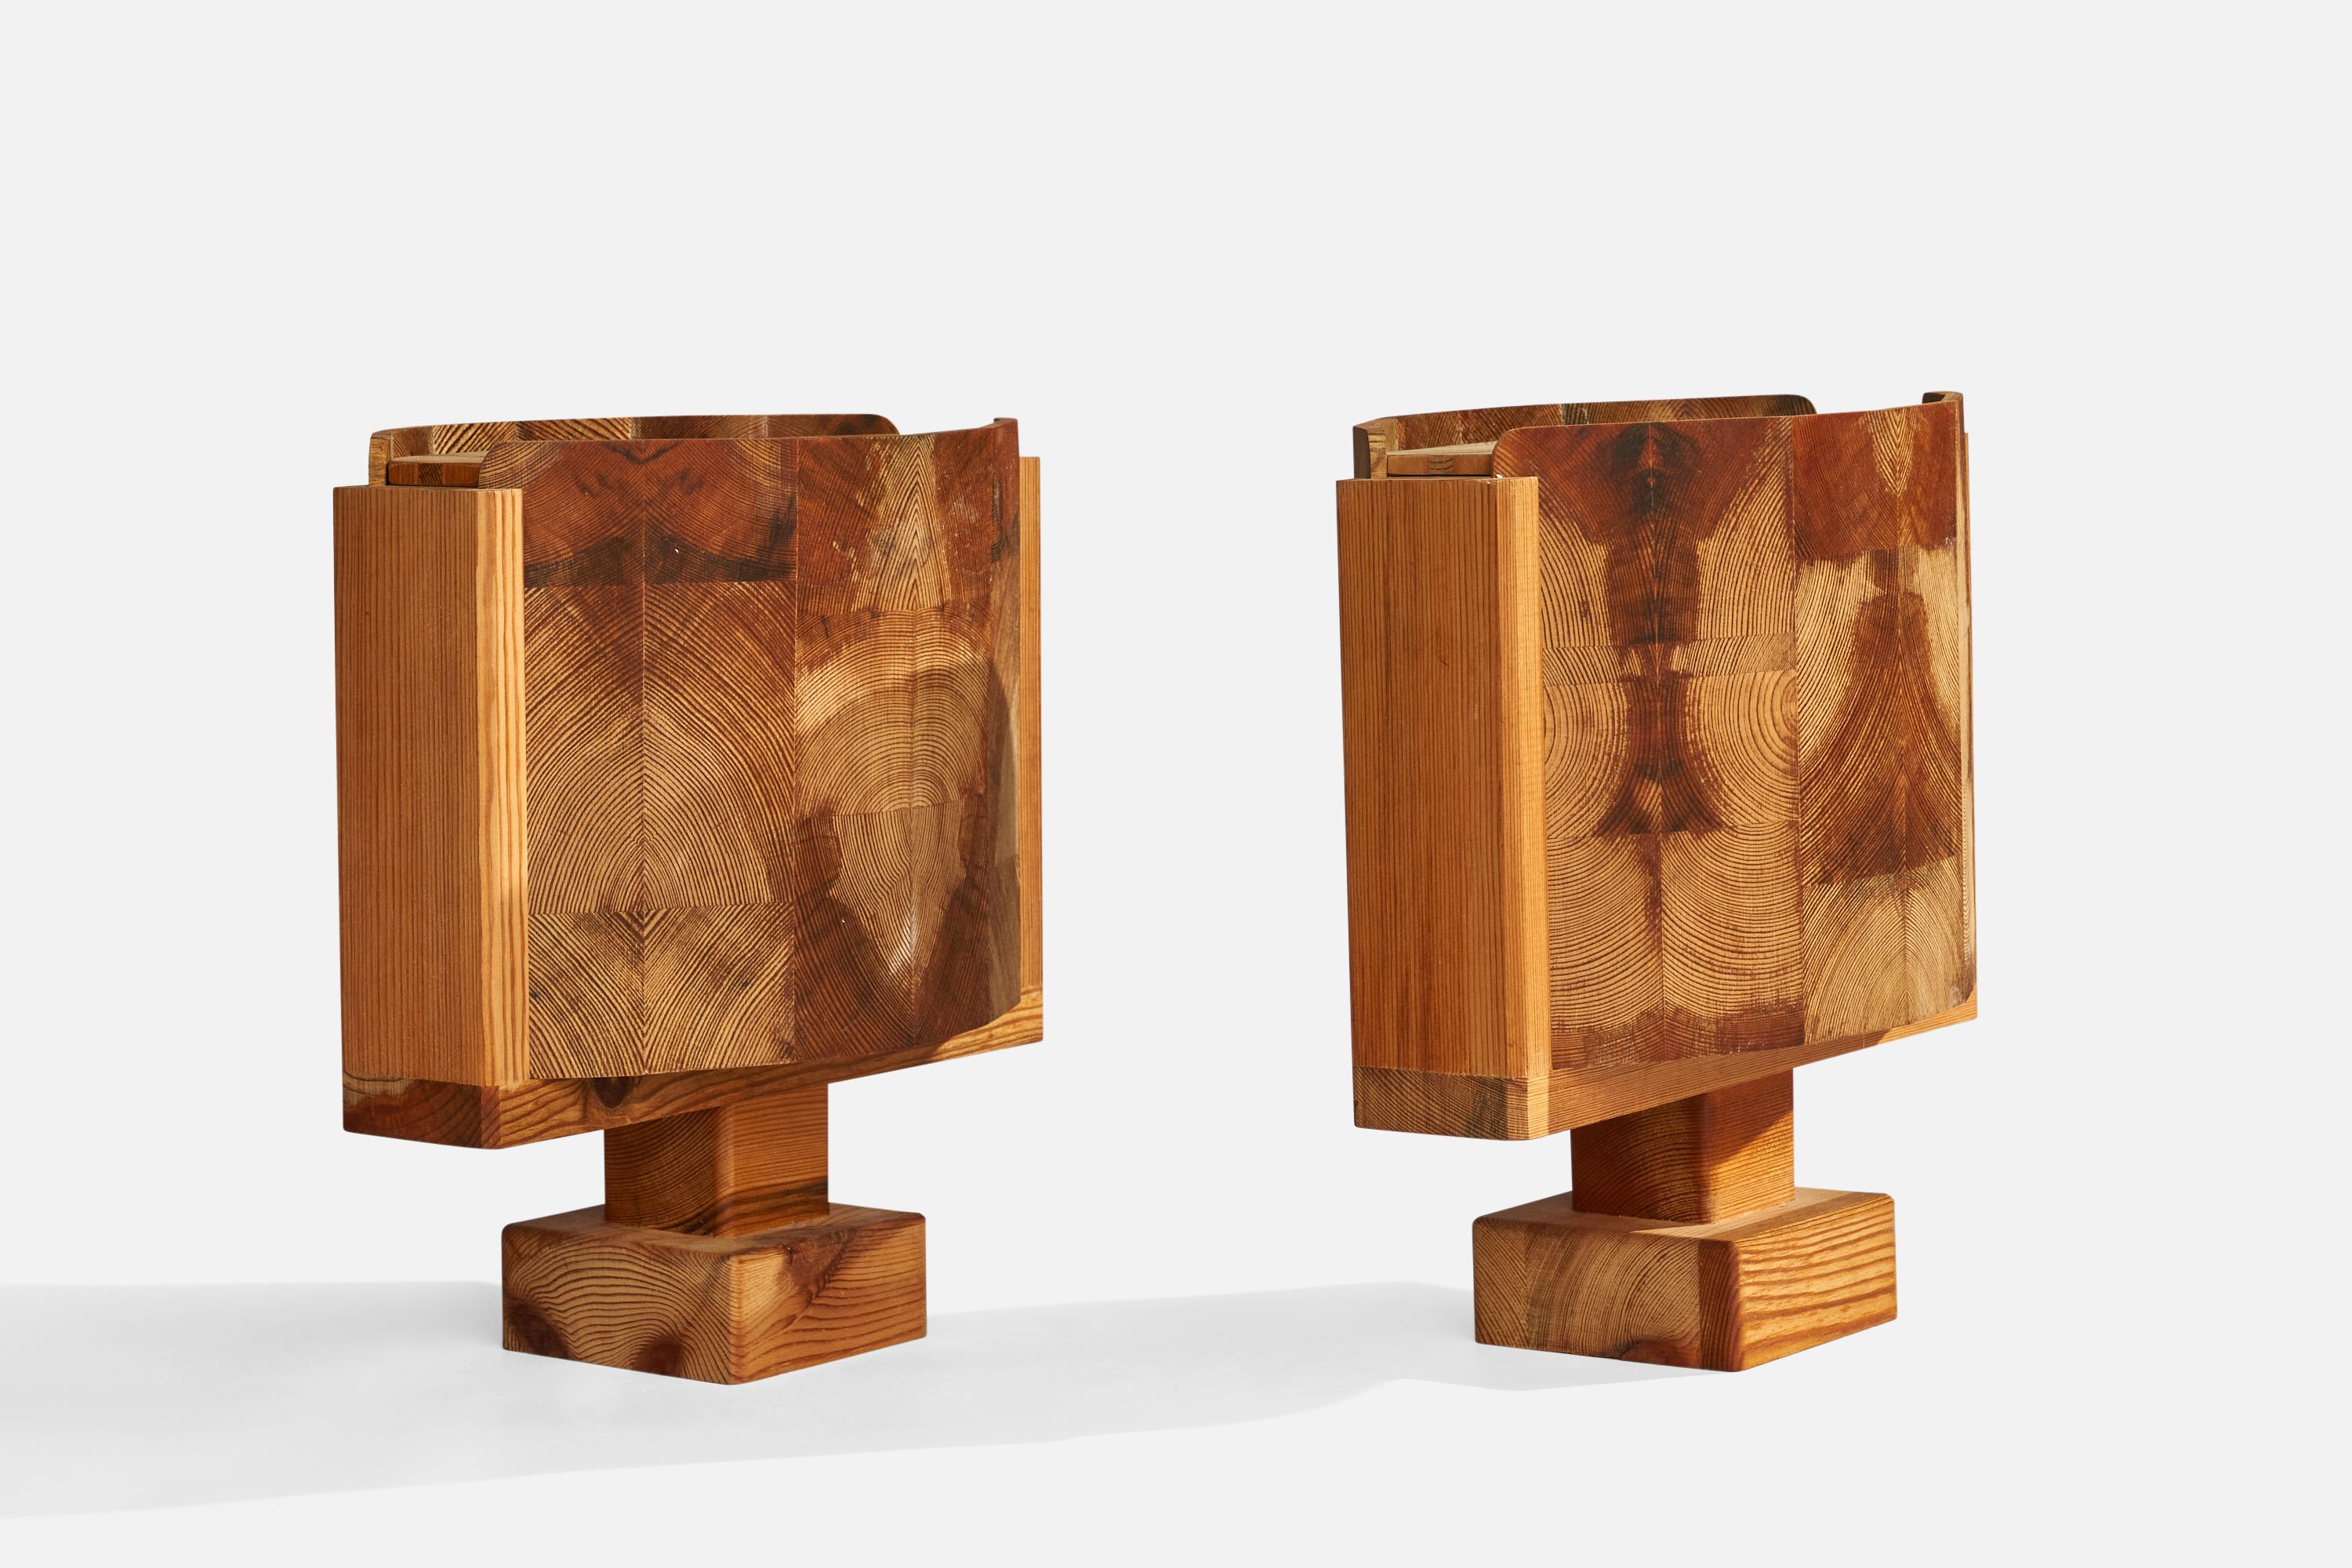 A pair of sizeable pine and spalting table lamps designed and produced by Dick Degerfeldt, Sweden, dated 1984.

Overall Dimensions (inches): 11.75” H x 11.25” W x 7” D
Stated dimensions include shade.
Bulb Specifications: E-14 Bulb
Number of